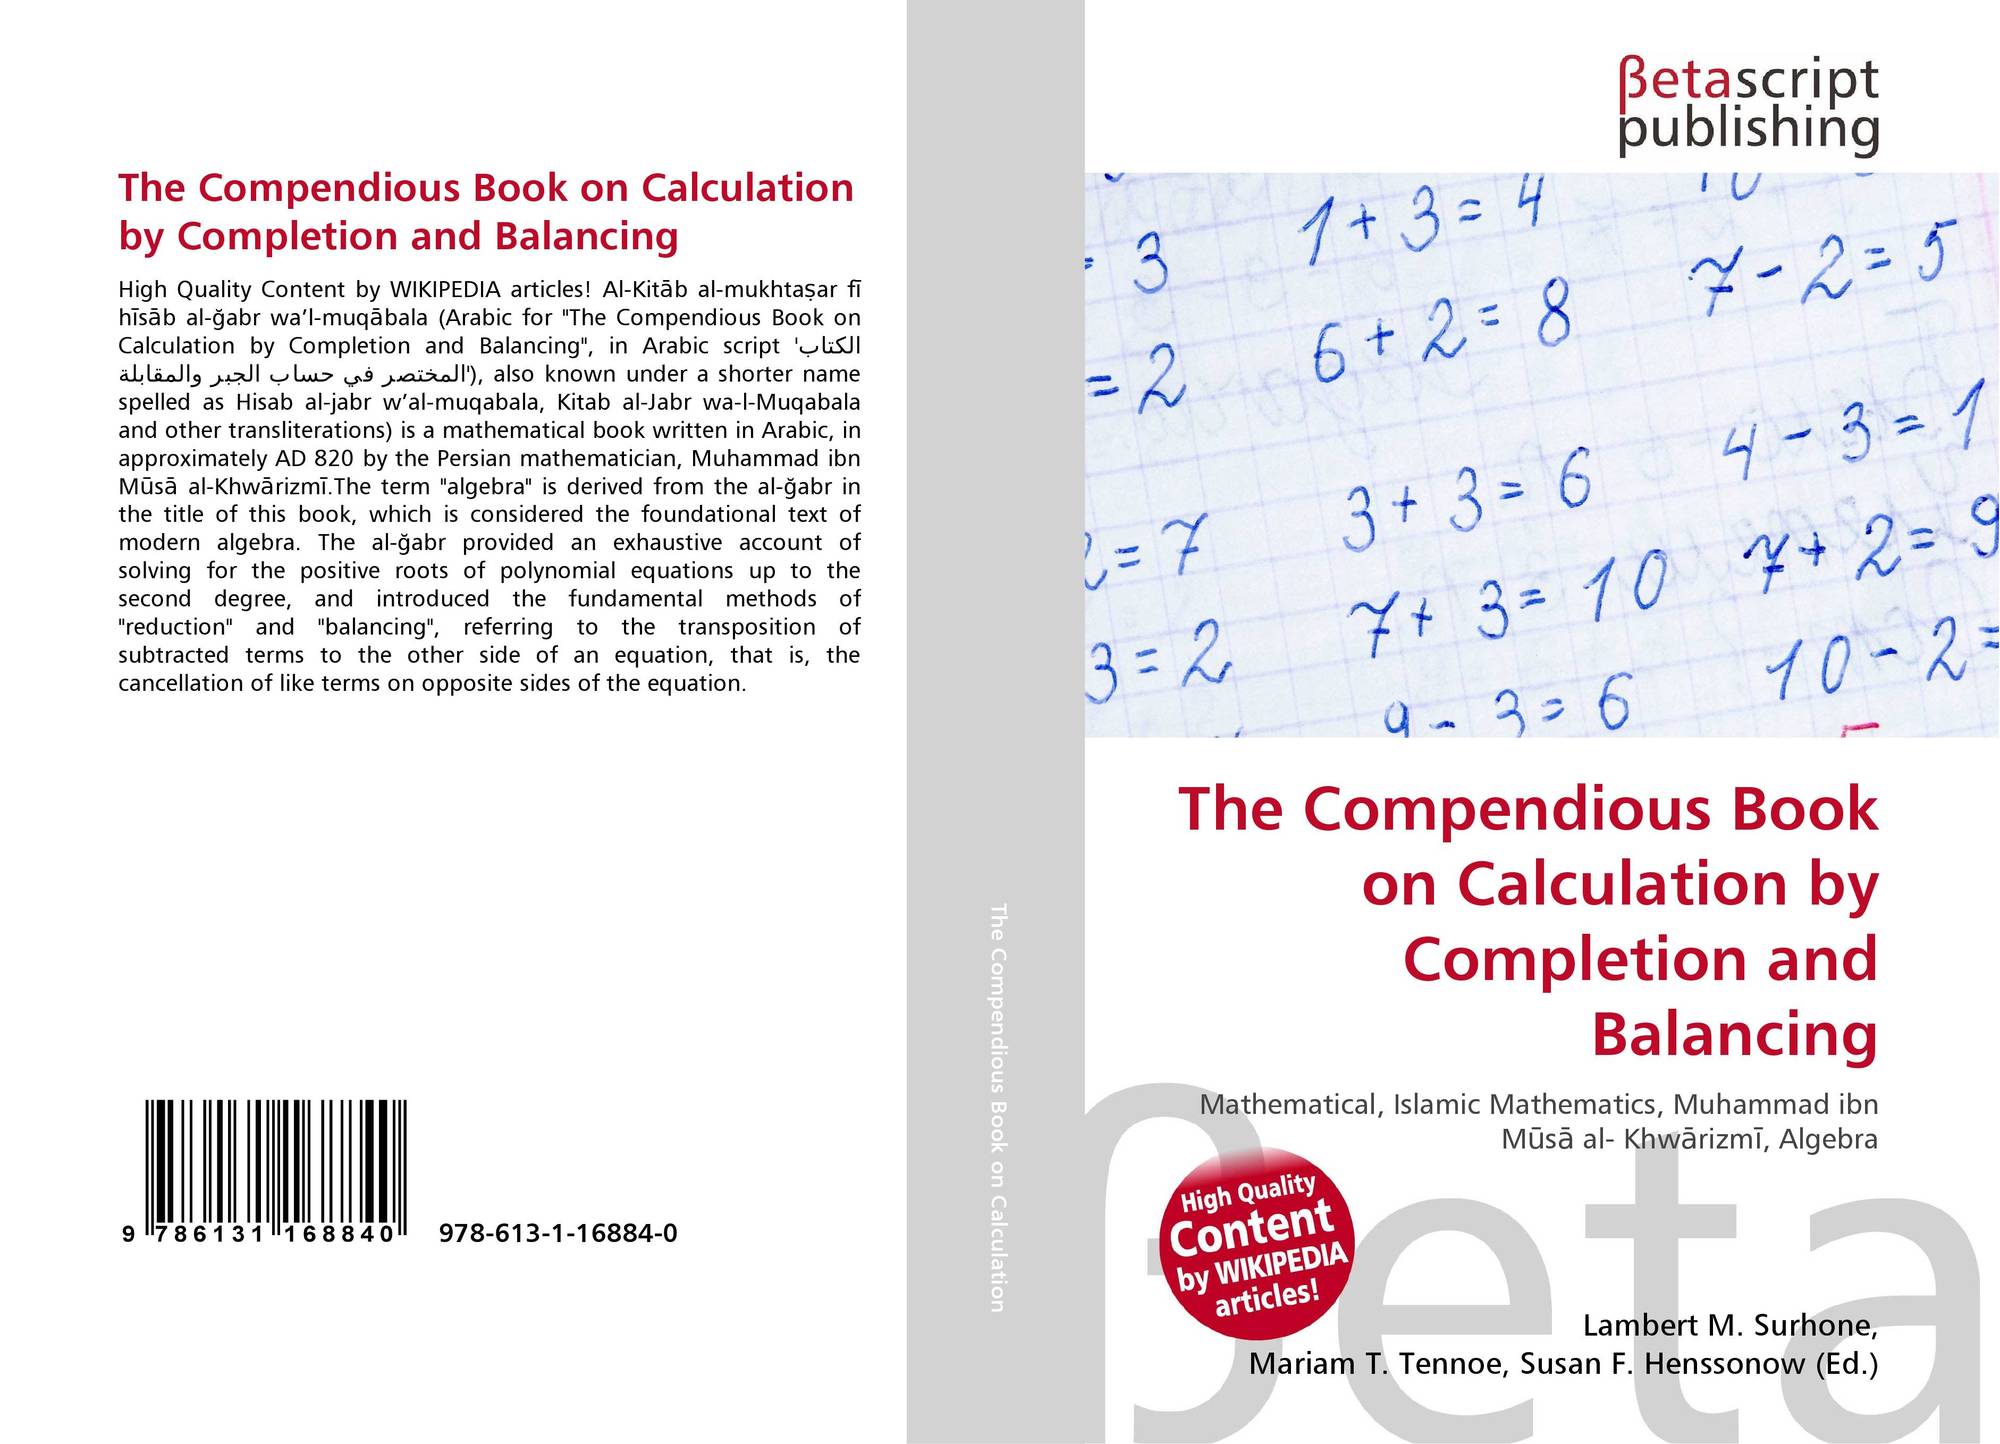 The Compendious Book on Calculation by Completion and Balancing httpsimagesourassetscomfullcover2000x9786